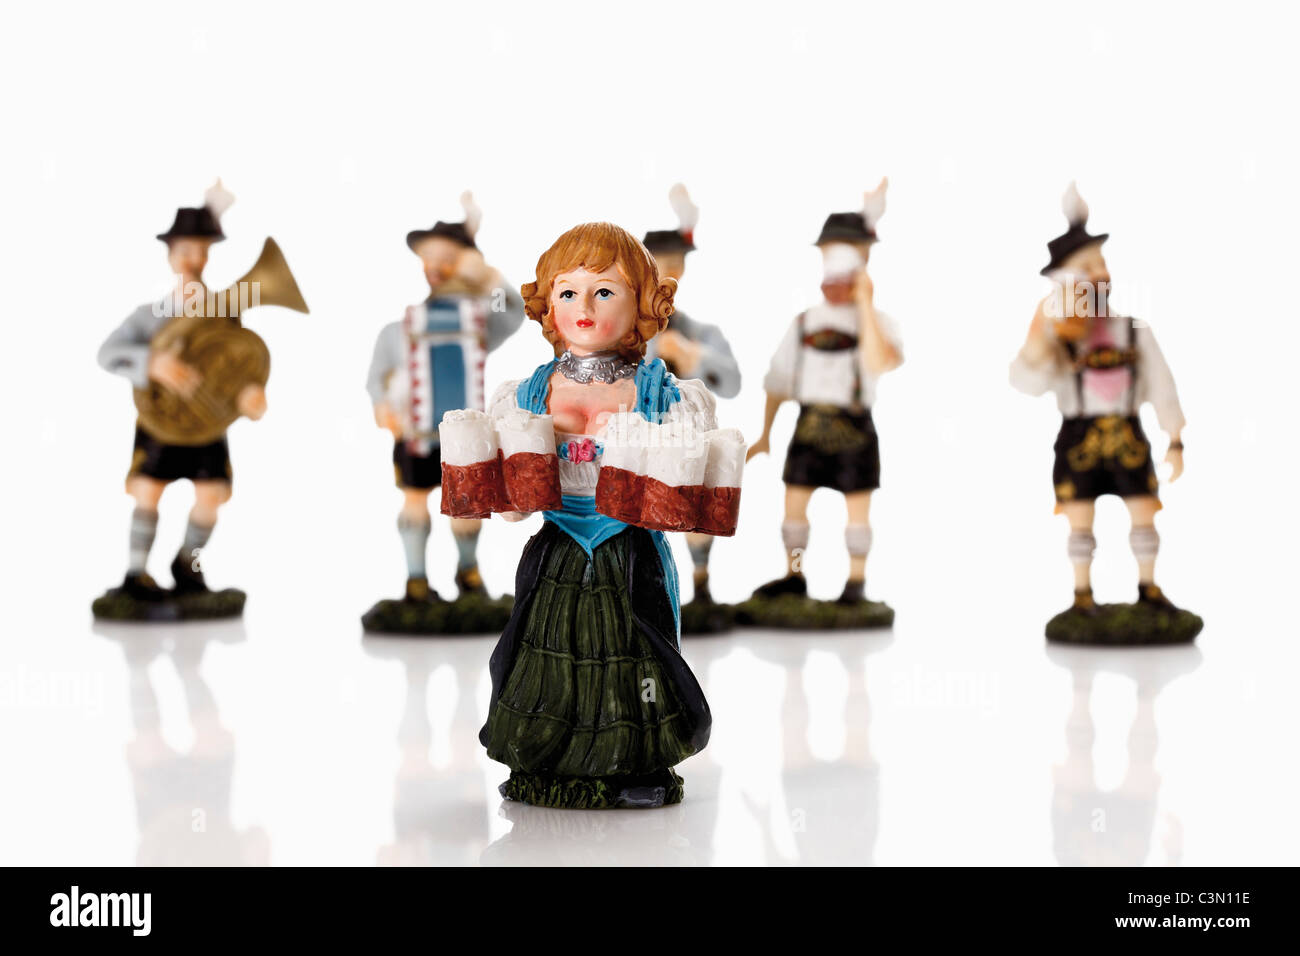 Bavarian waitress figurines holding beer stein with music band in background Stock Photo